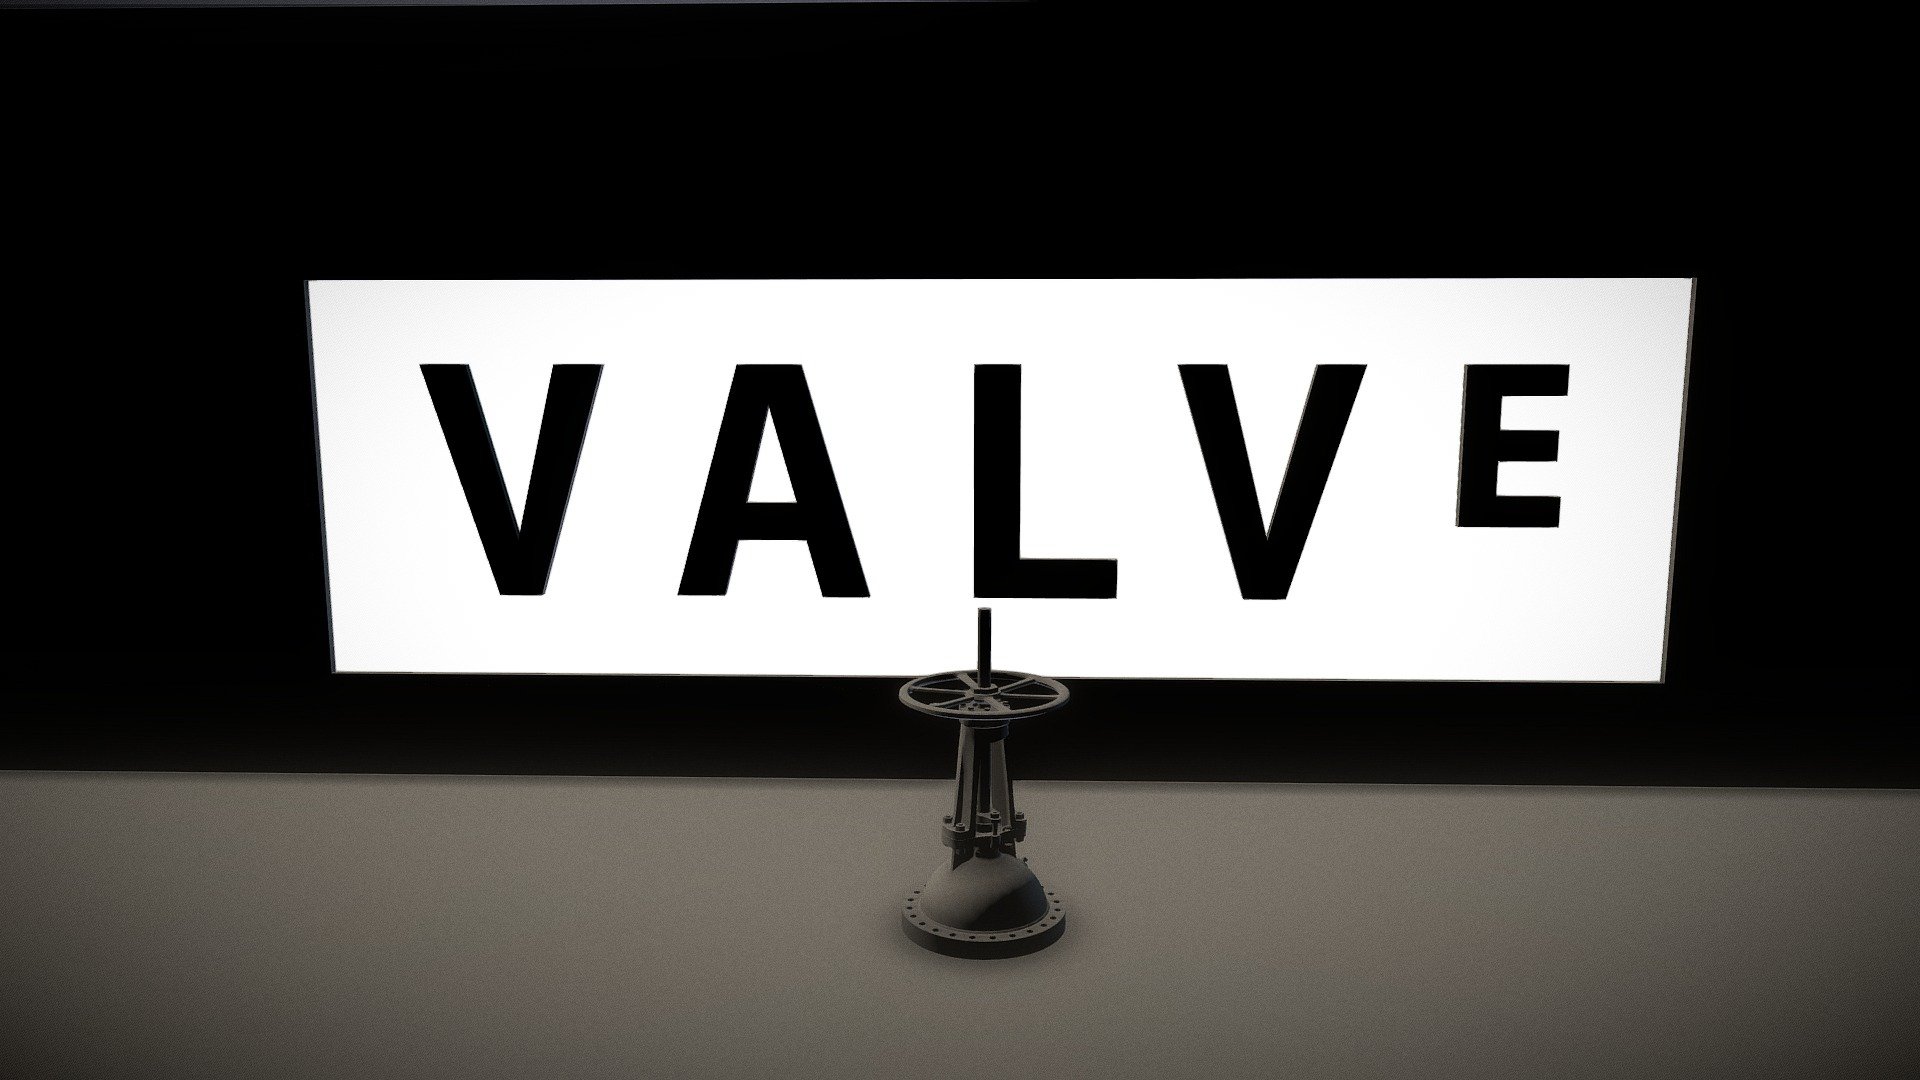 Valve Software Logos (Old/New) by gaspard